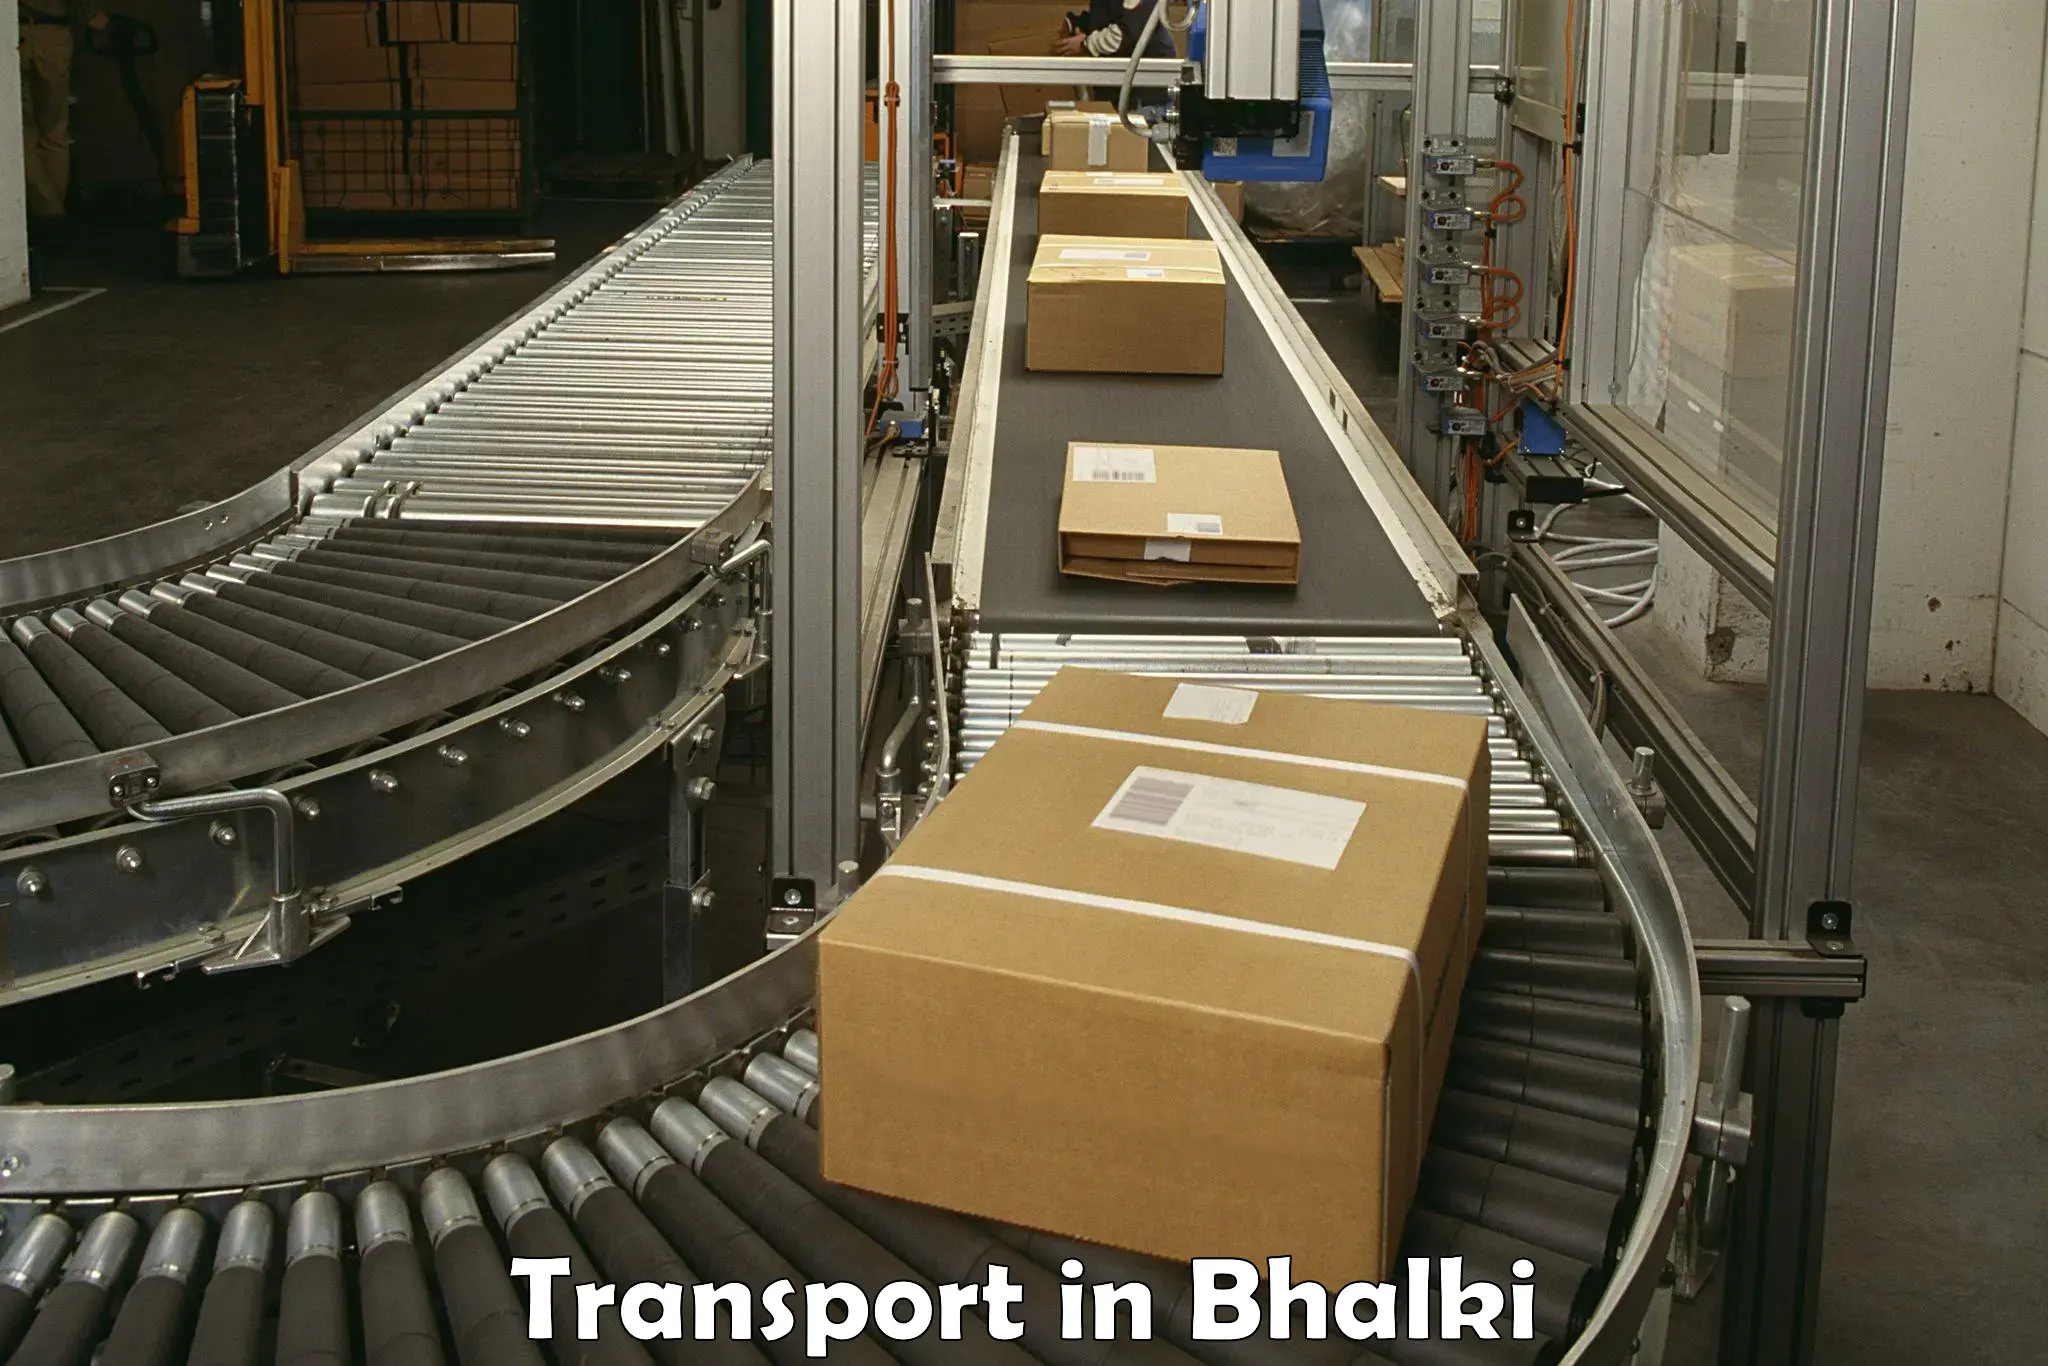 Daily parcel service transport in Bhalki